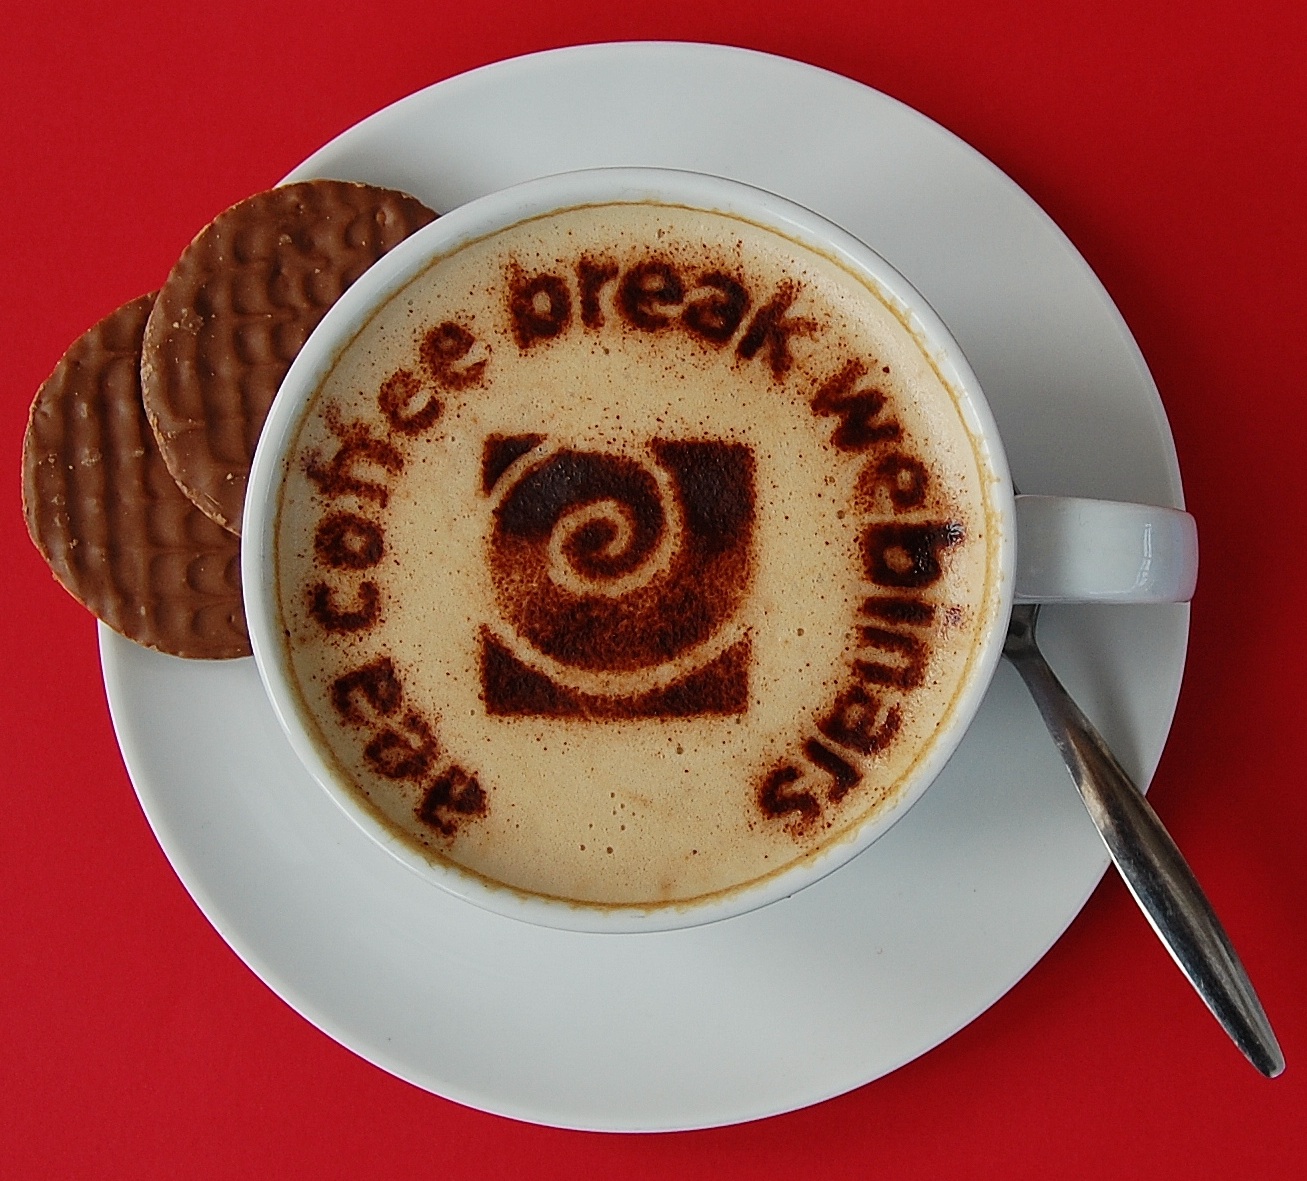 Picture of a cup of coffee with "AEA Coffee Break Webinars" written in the coffee itself.